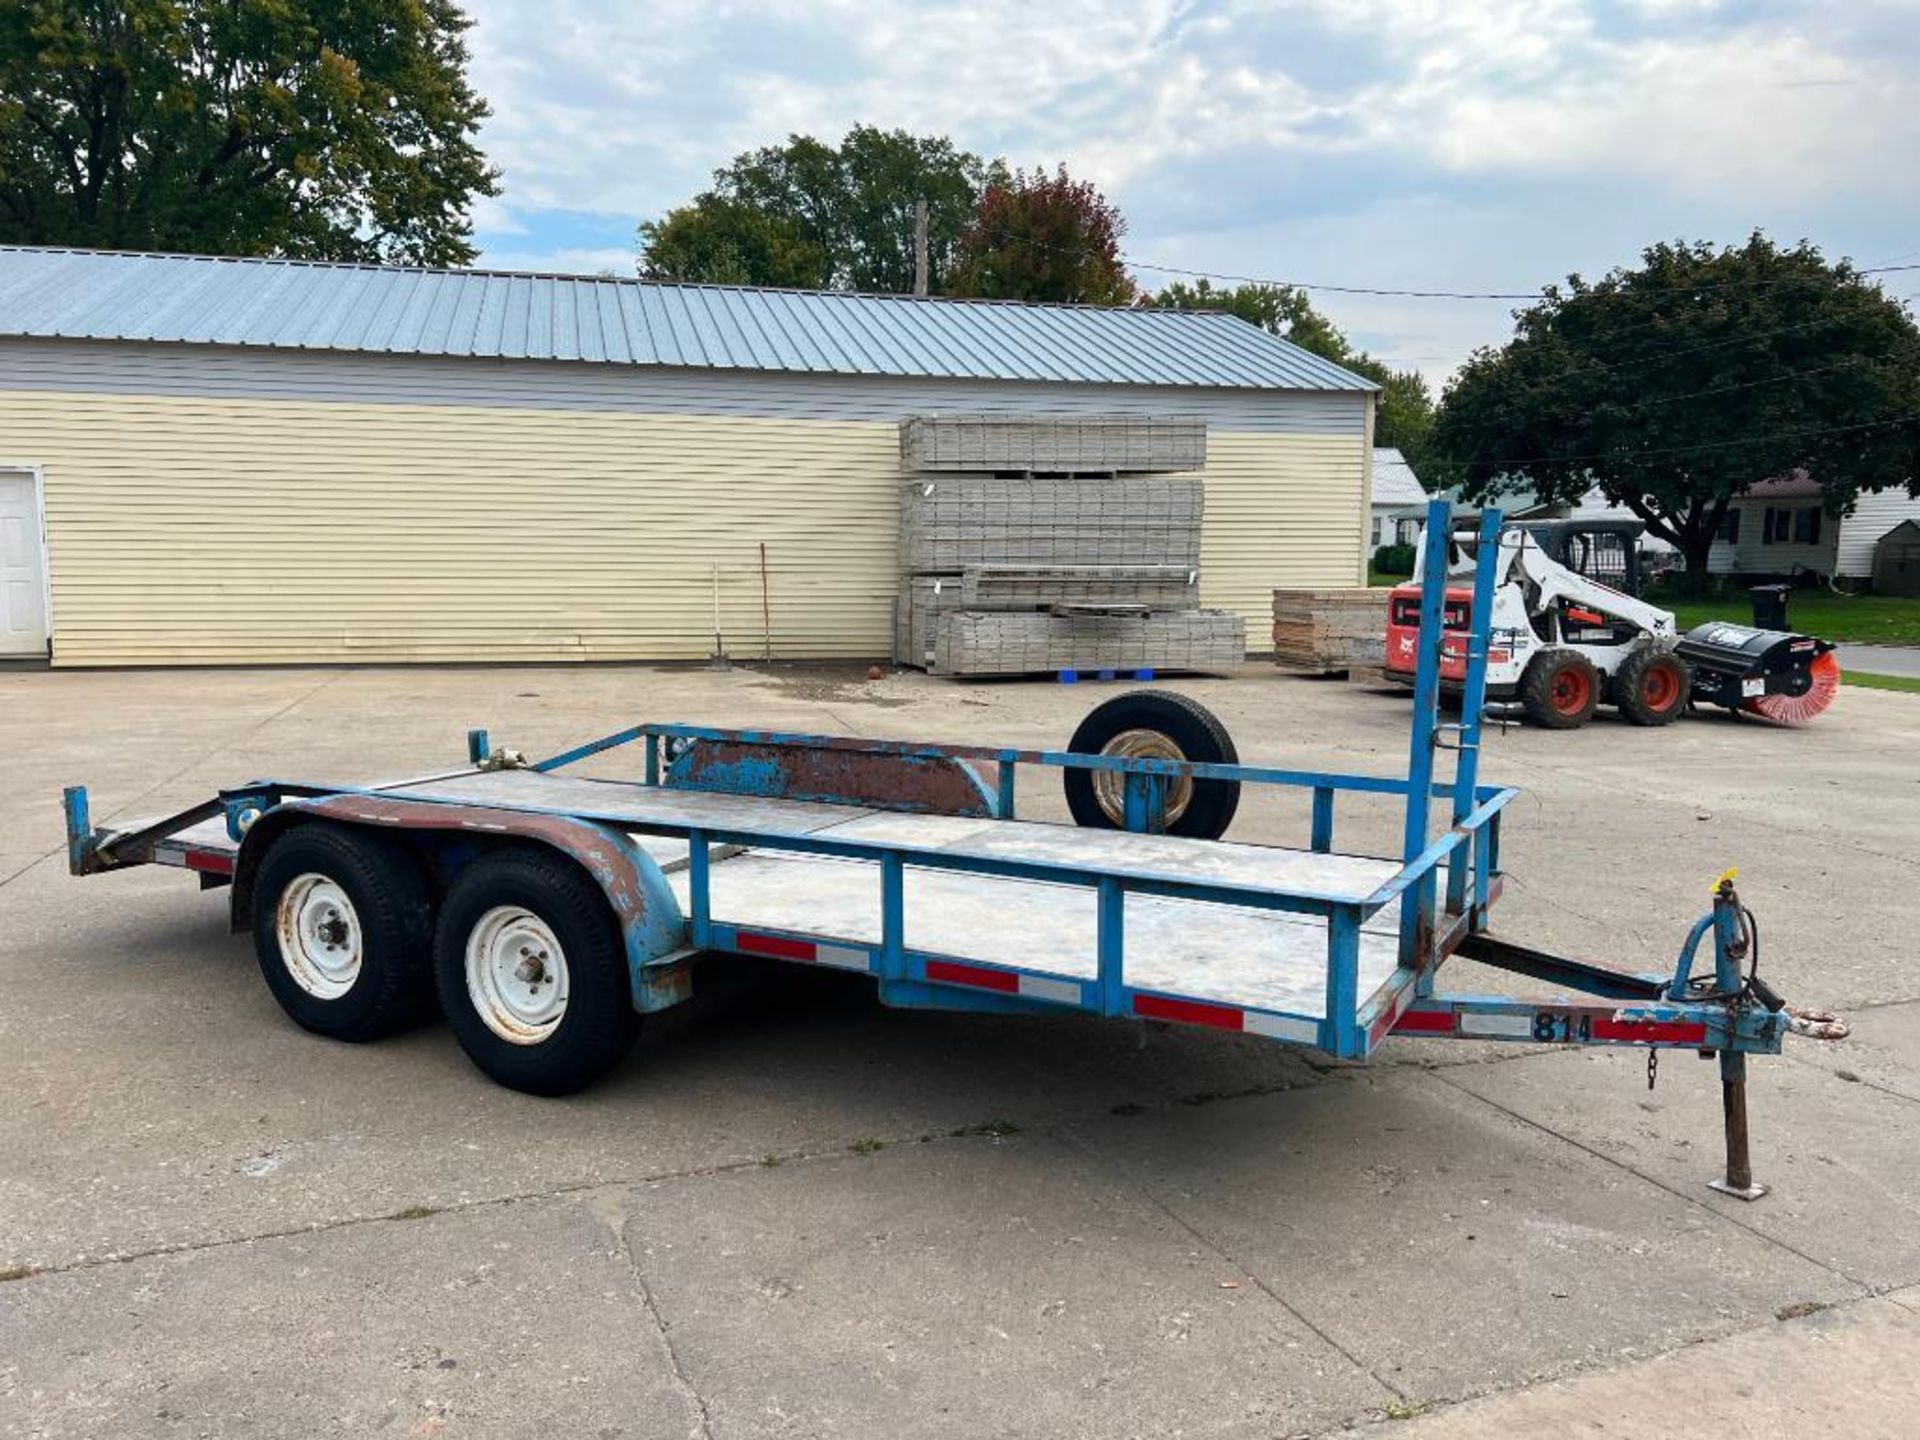 1988 Brewer Utility Trailer, VIN #068814, Flatbed 16' x 76", Dual Axle with Spare Tire & Pintail Rin - Image 2 of 6